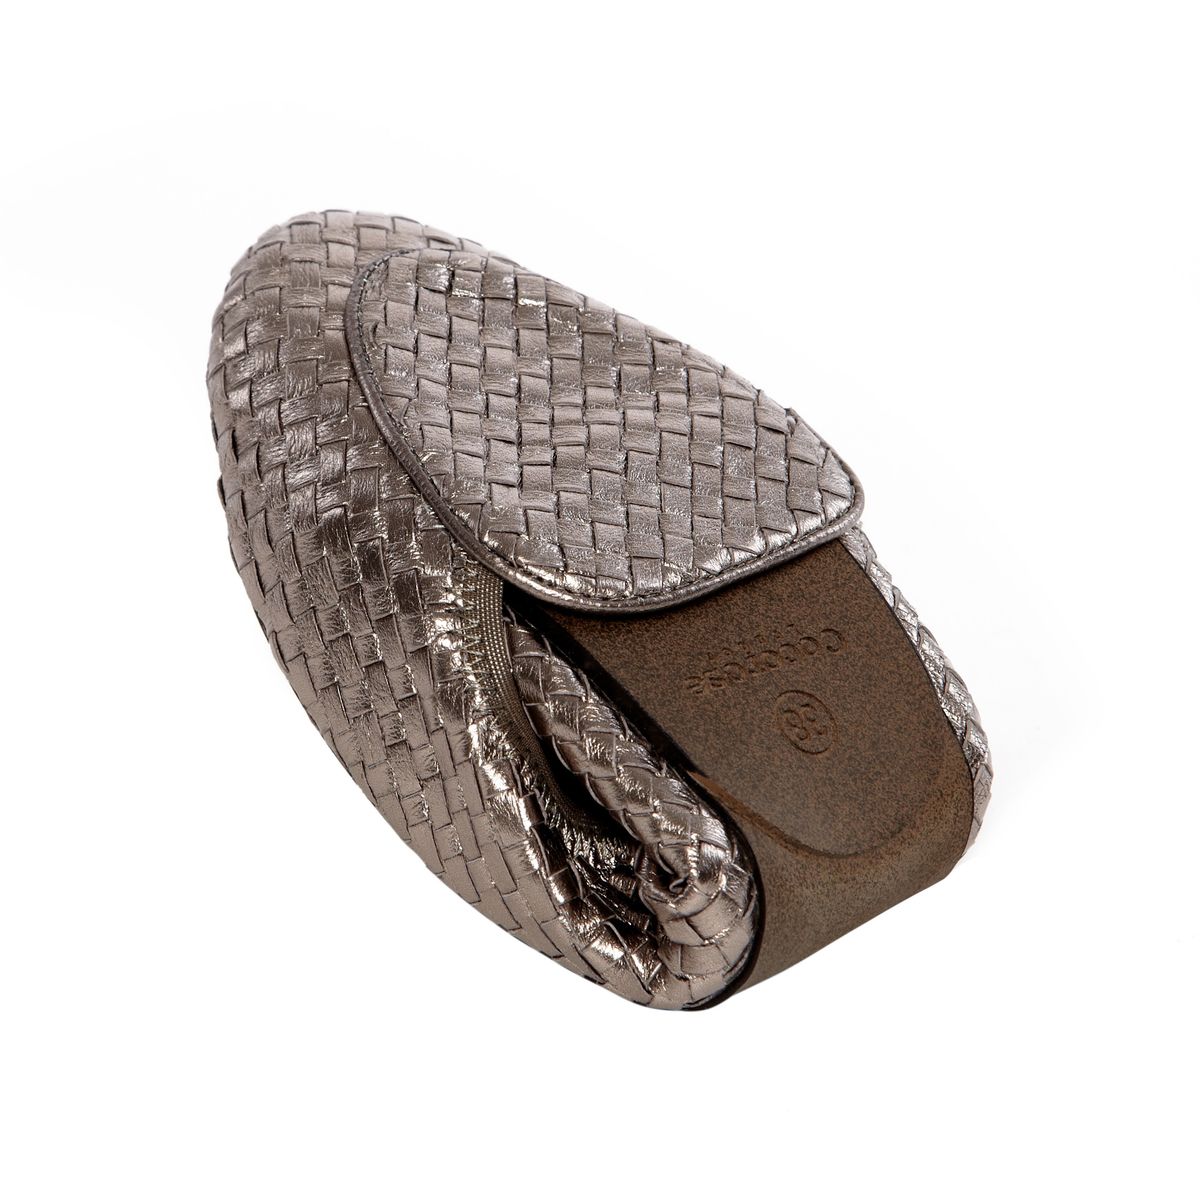 Cocorose London Metallic Pewter Woven Leather Loafers